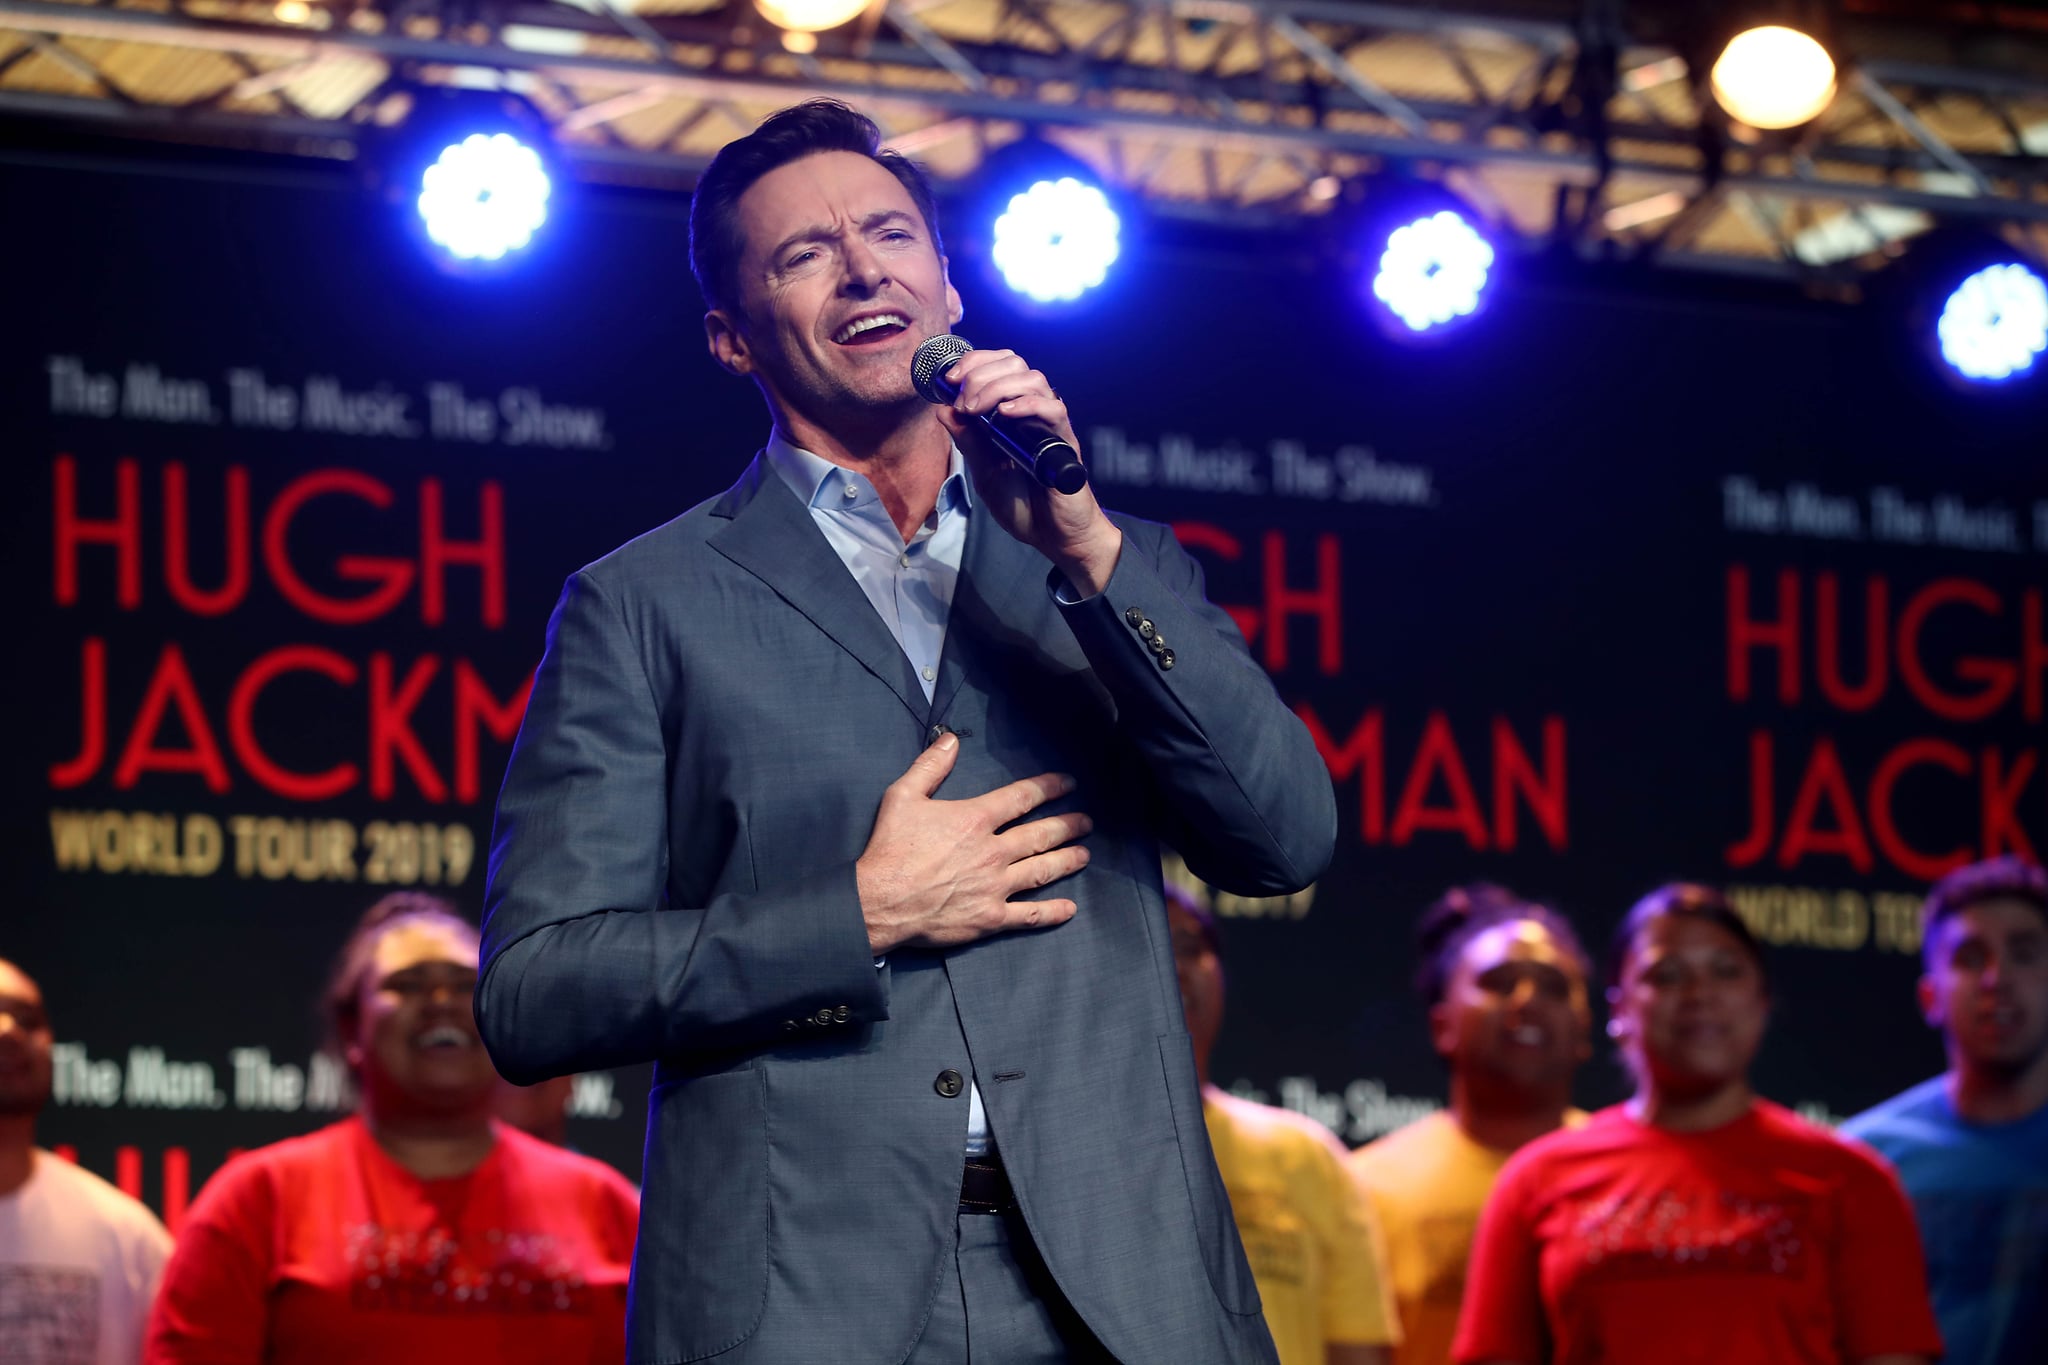 AUCKLAND, NEW ZEALAND - FEBRUARY 27: Actor Hugh Jackman performs with students from AUT's South Campus on February 27, 2019 in Auckland, New Zealand. Hugh Jackman has confirmed he is bringing his world tour, The Man. The Music. The Show, to Auckland's Spark Arena in September(Photo by Phil Walter/Getty Images)